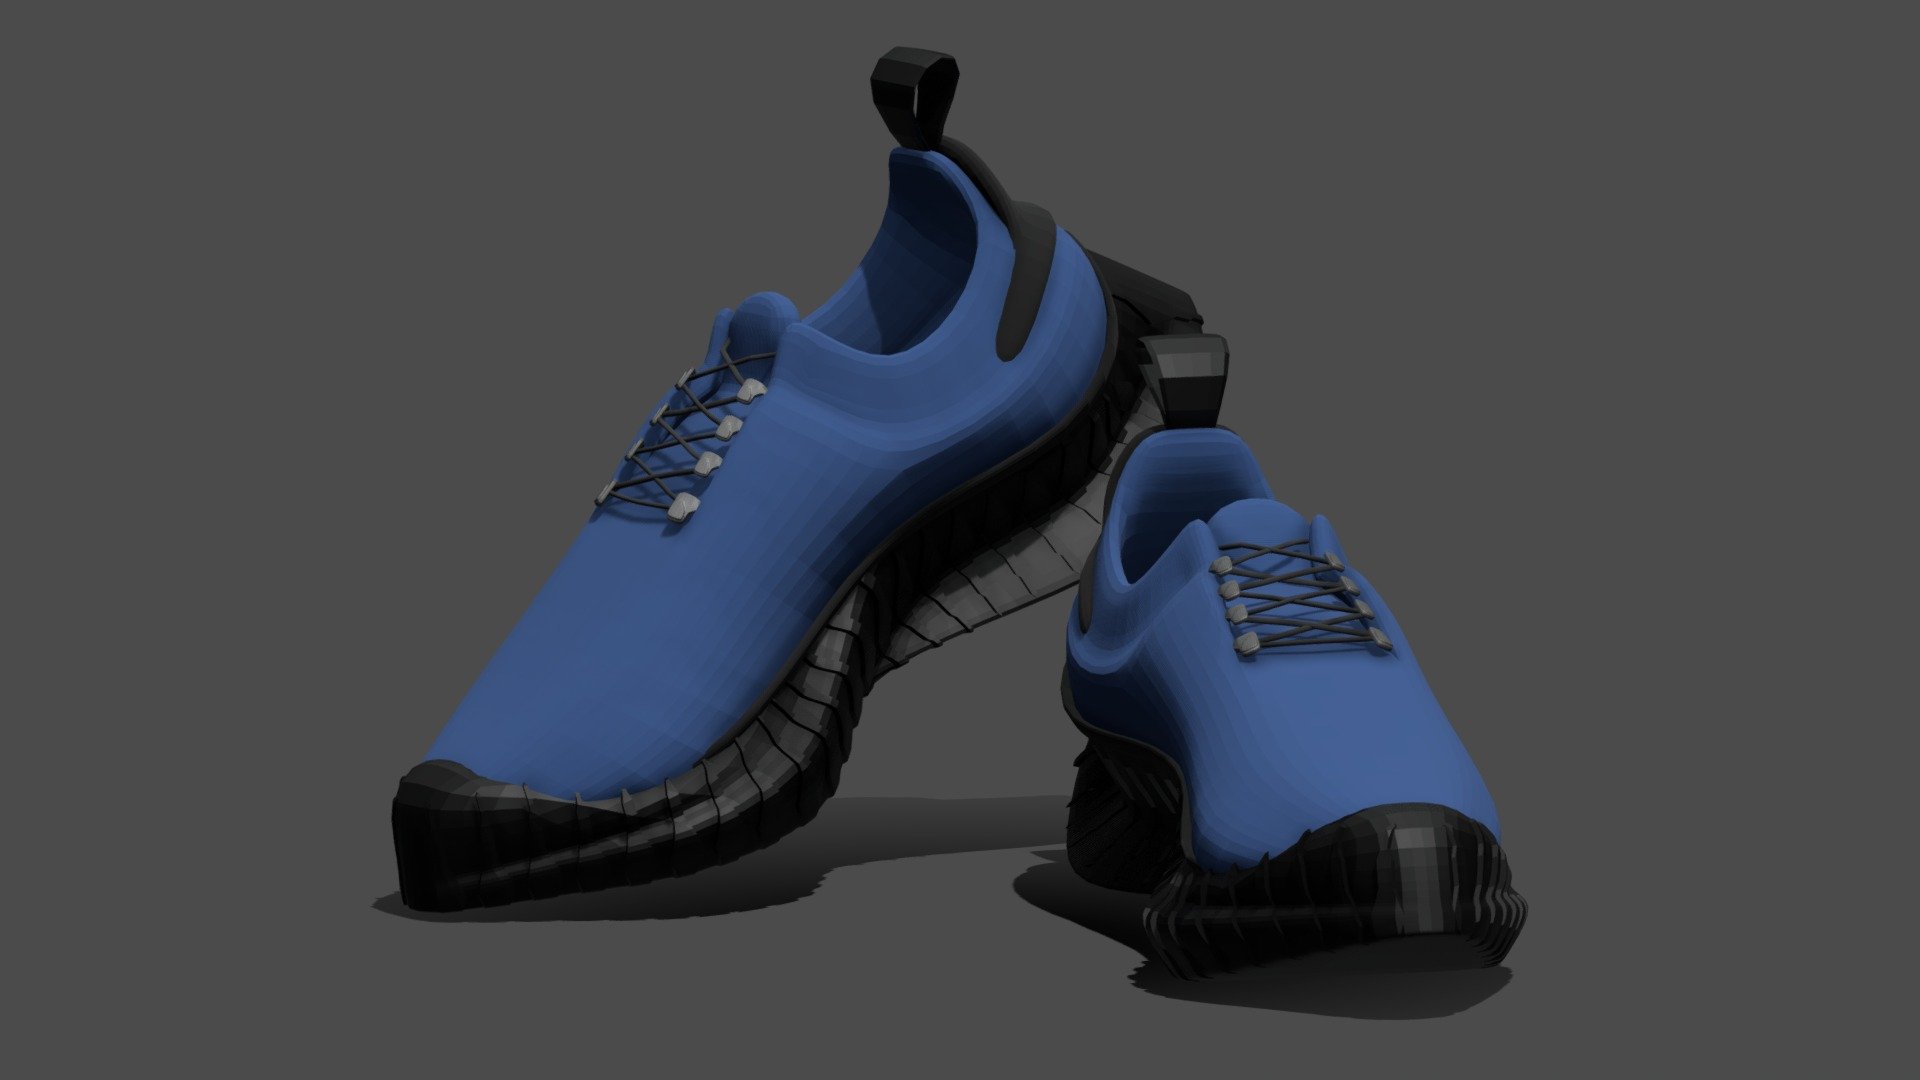 Another Shoe - 3D model by Fransozie [cb09087] - Sketchfab